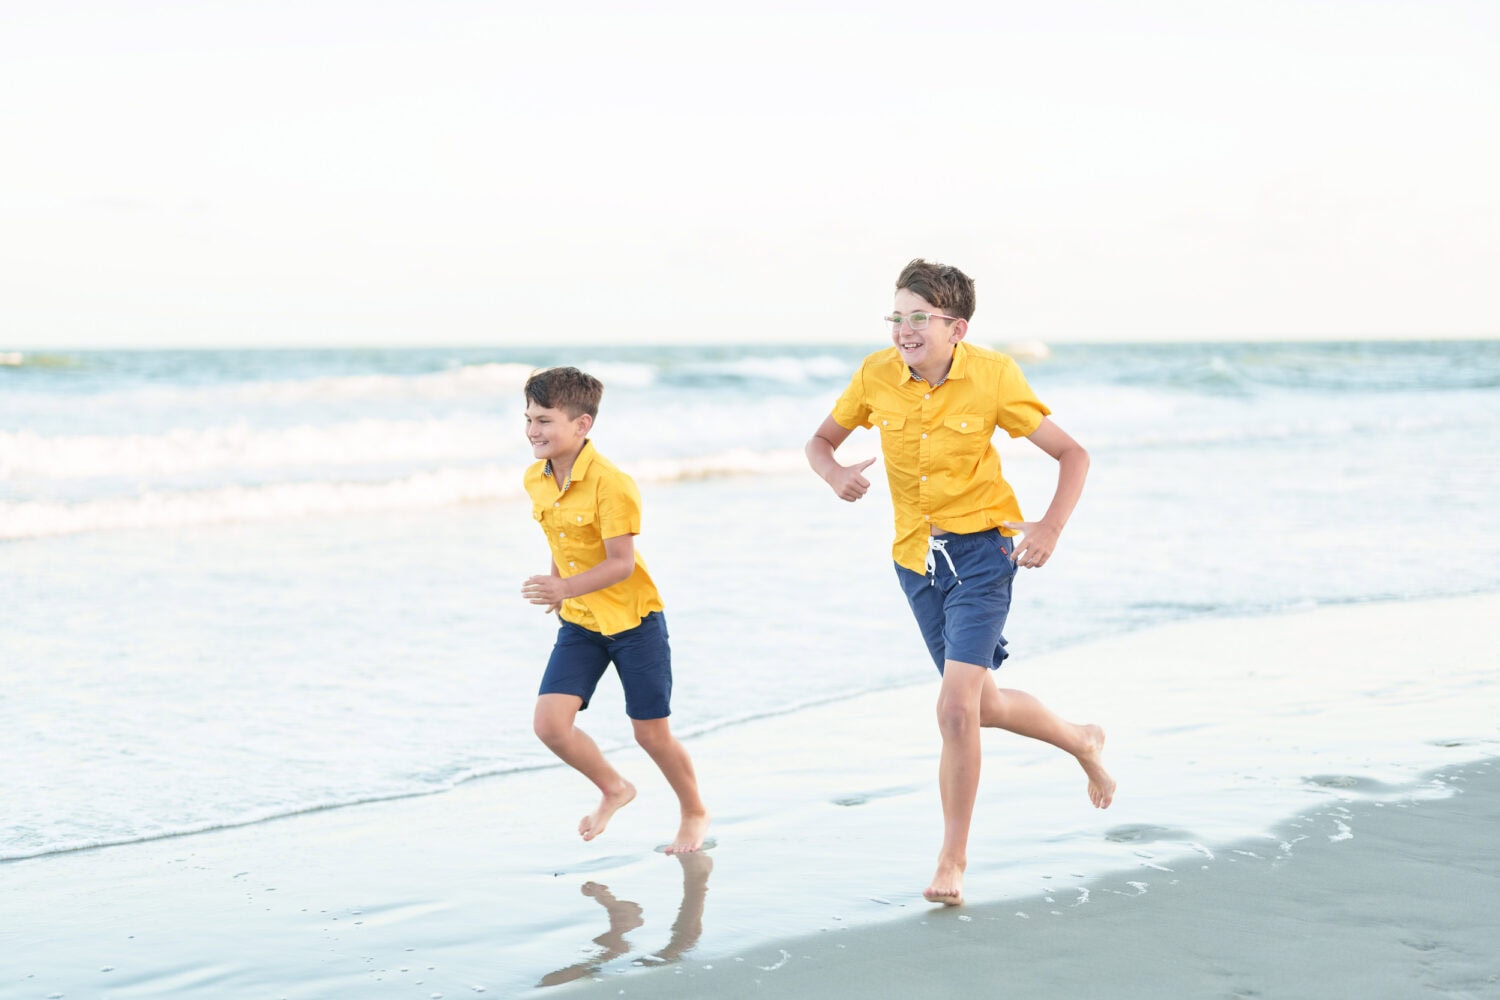 Brothers racing down the beach - North Myrtle Beach